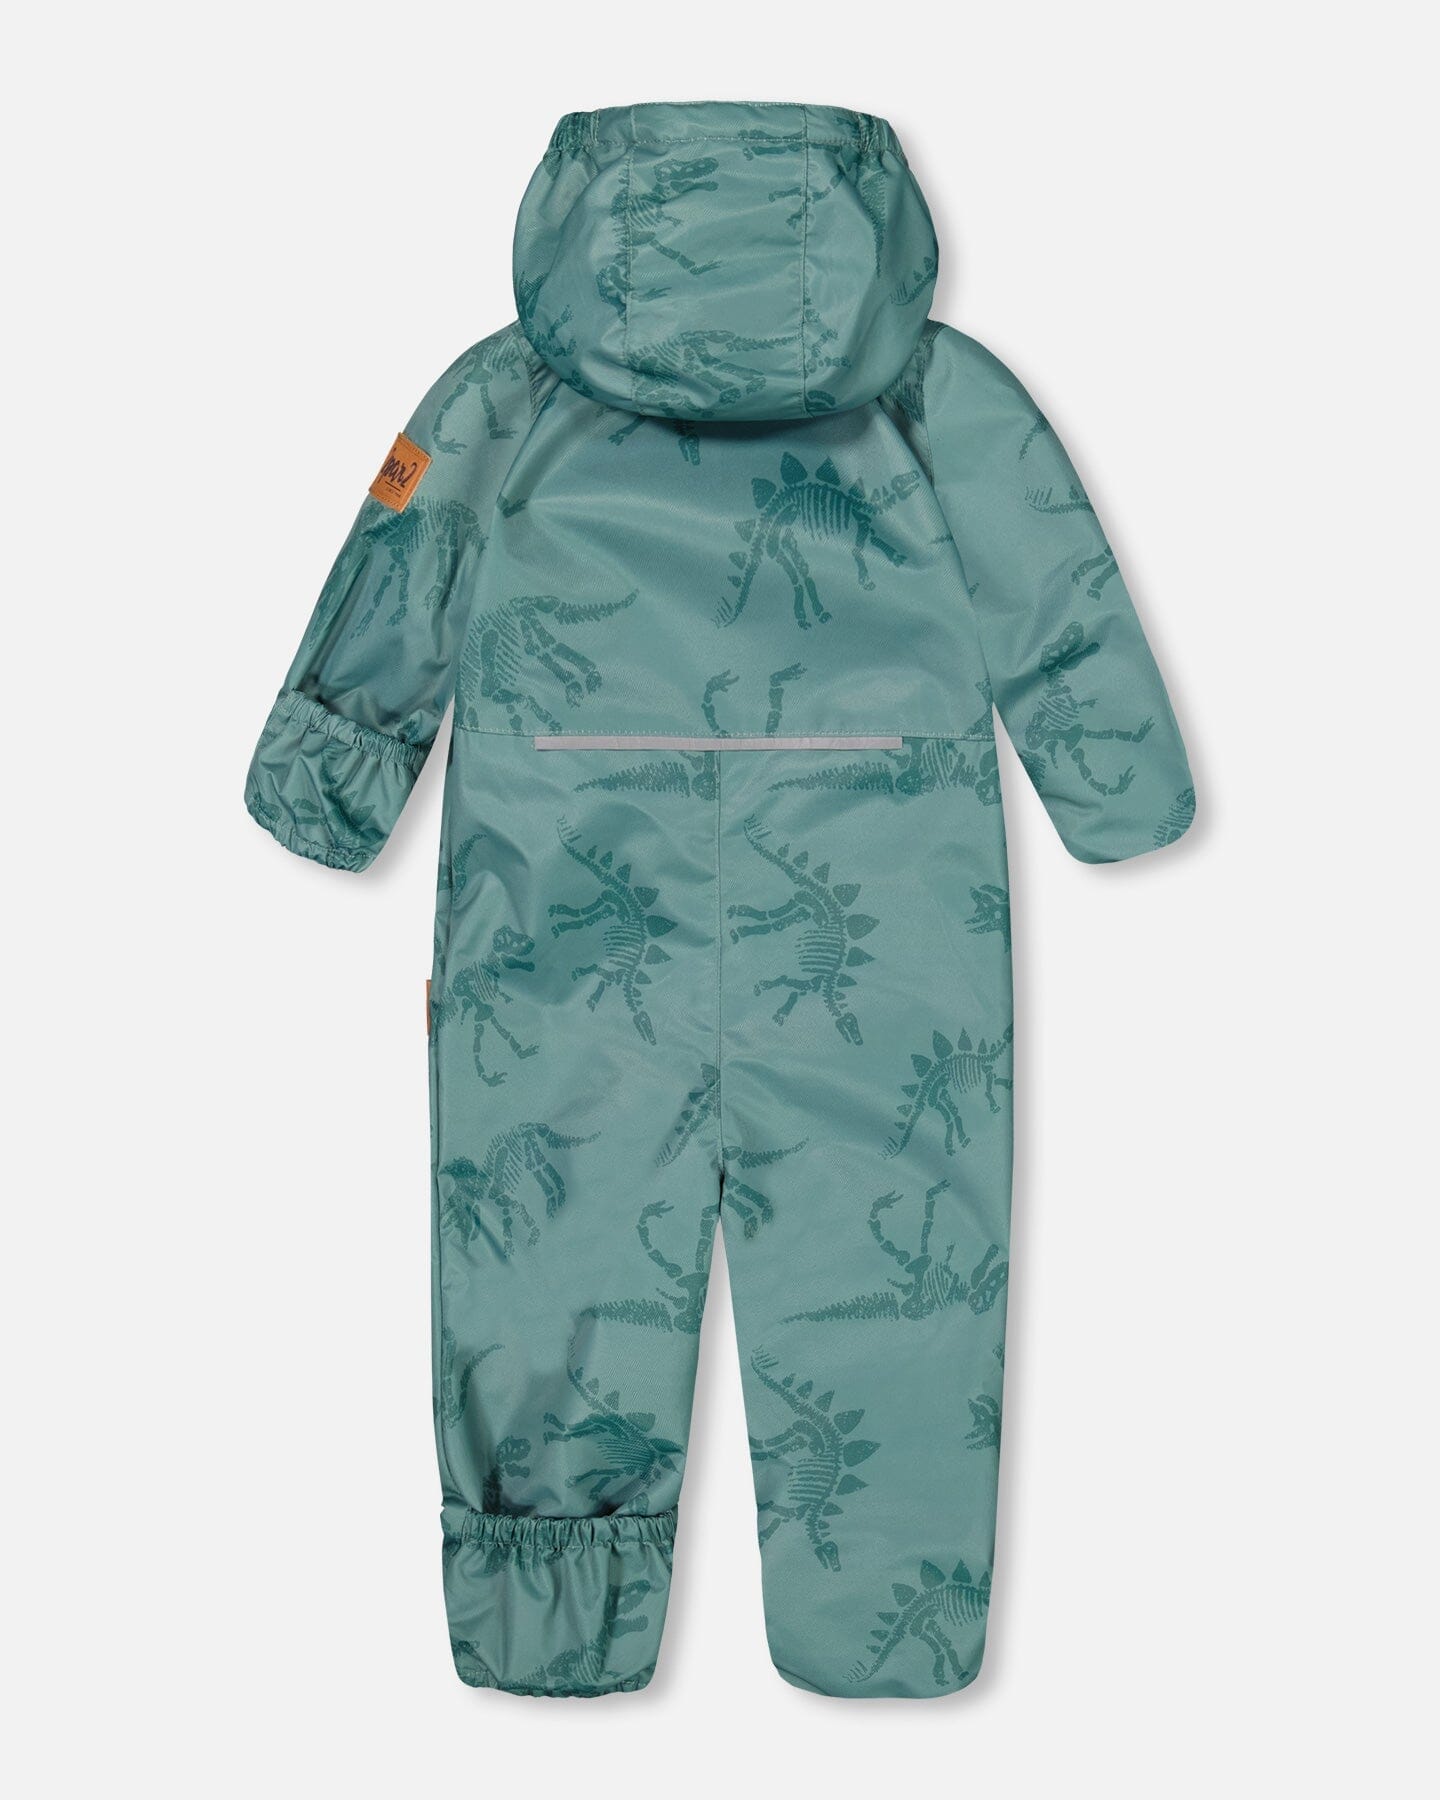 Baby Mid-Season One Piece With Hat Green Printed Skeletons Dinosaurs - F30W65_017